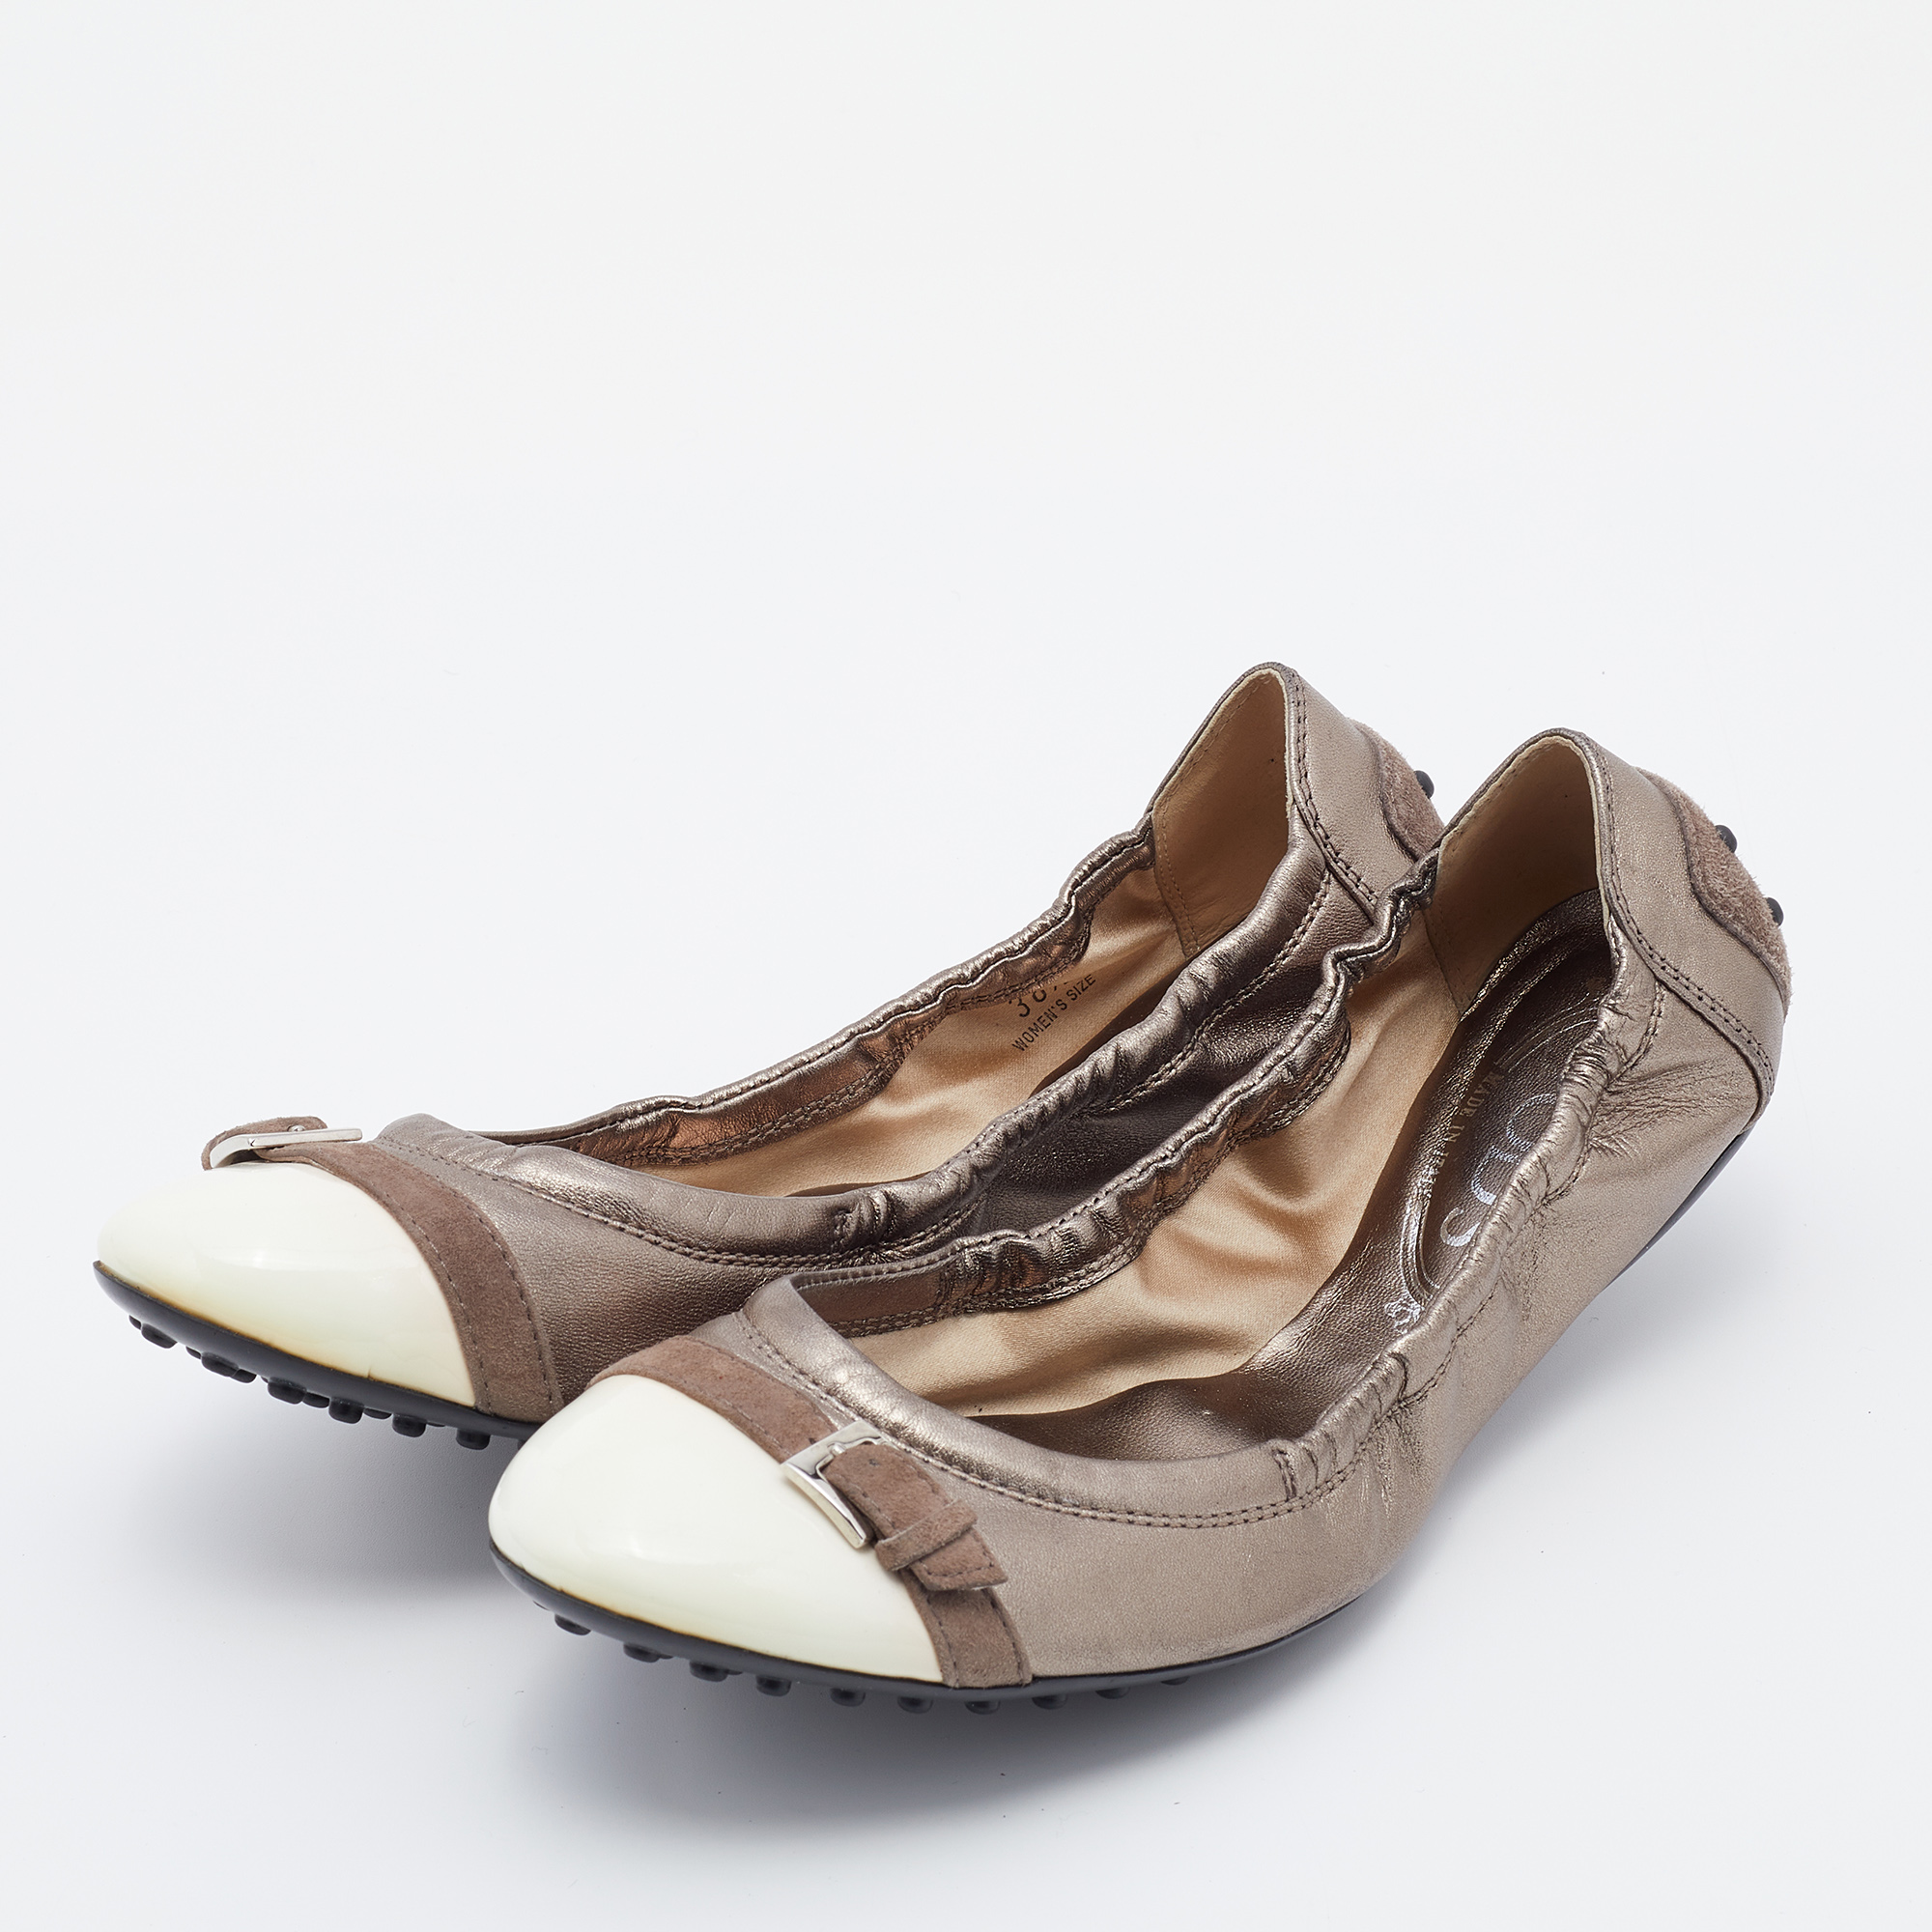 

Tod's Metallic Beige/Cream Leather and Patent Leather Scrunch Ballet Flats Size